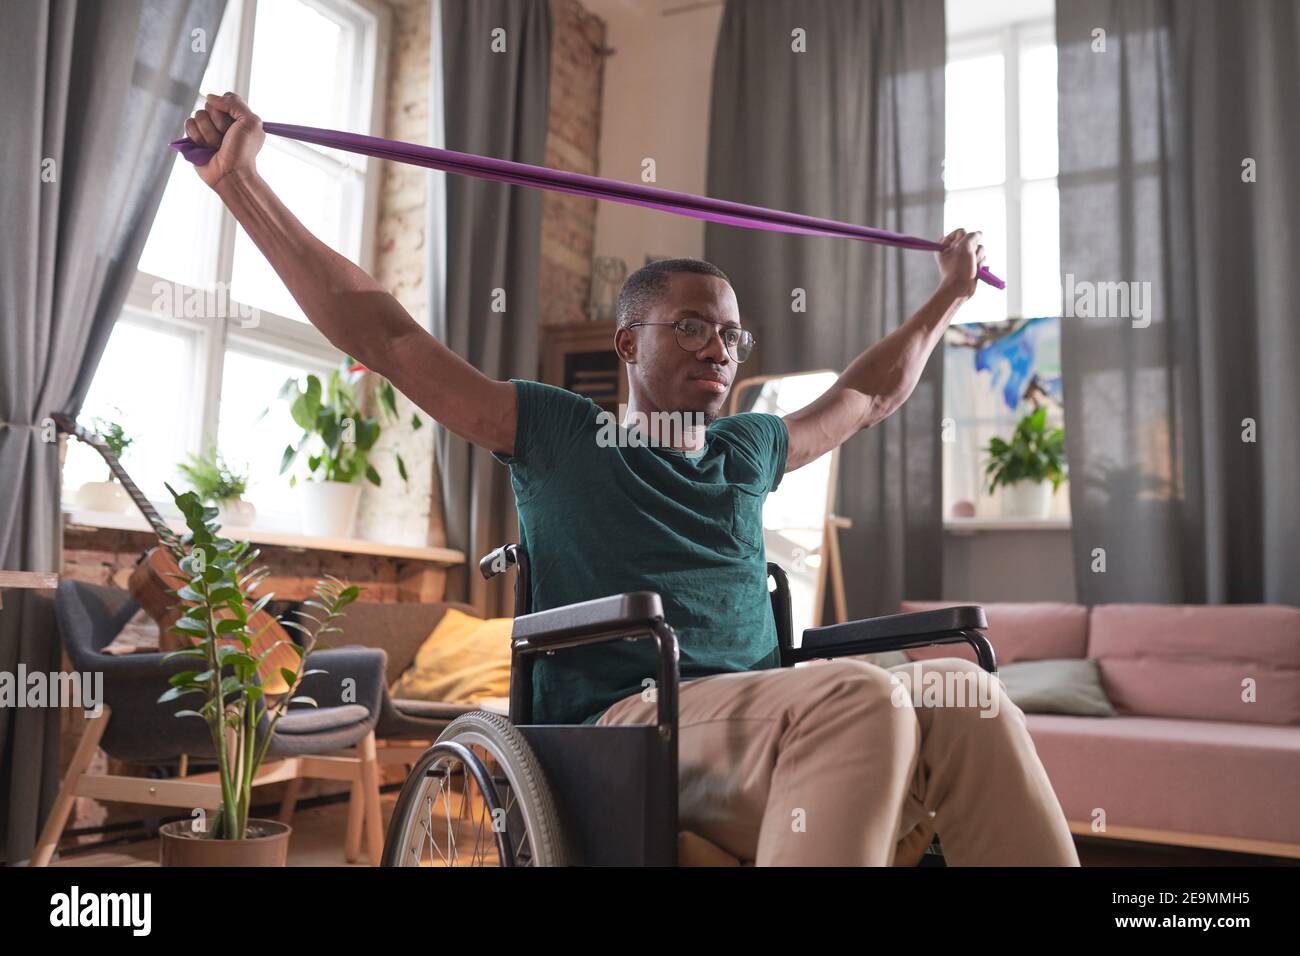 African disabled man sitting in wheelchair raising his arms and doing stretching exercises during sports training at home Stock Photo